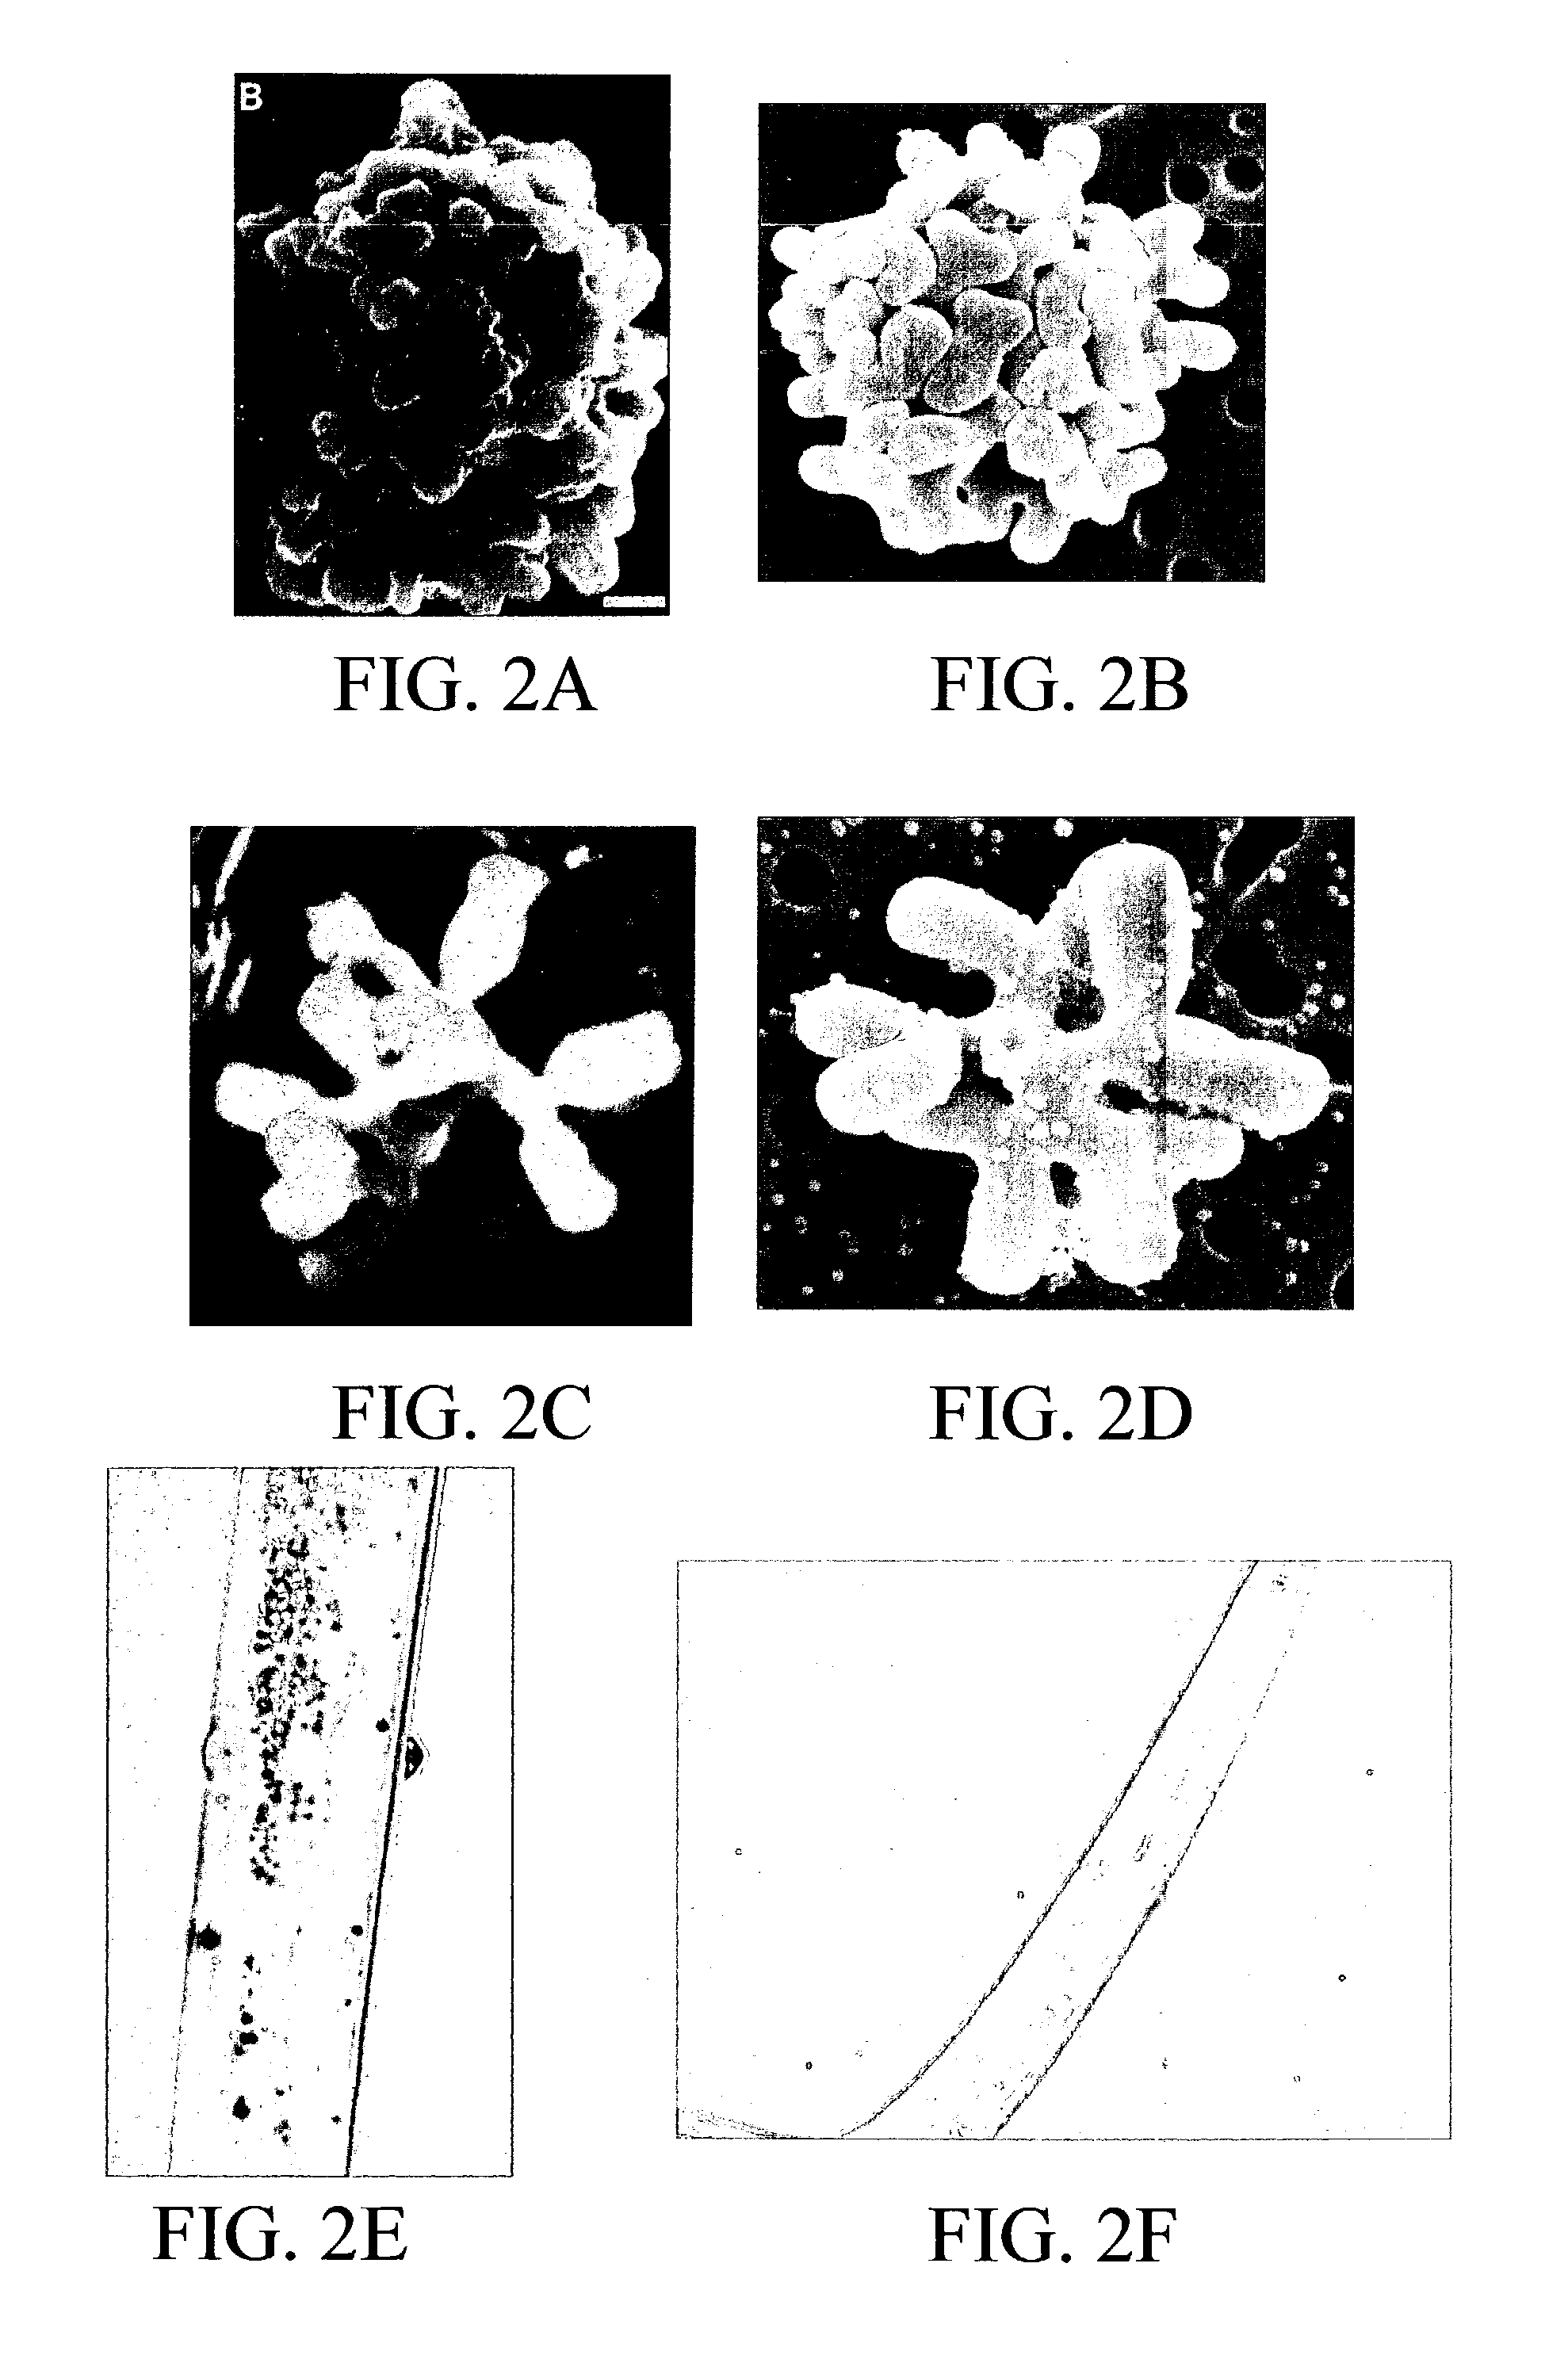 Materials and methods for in vitro production of bacteria